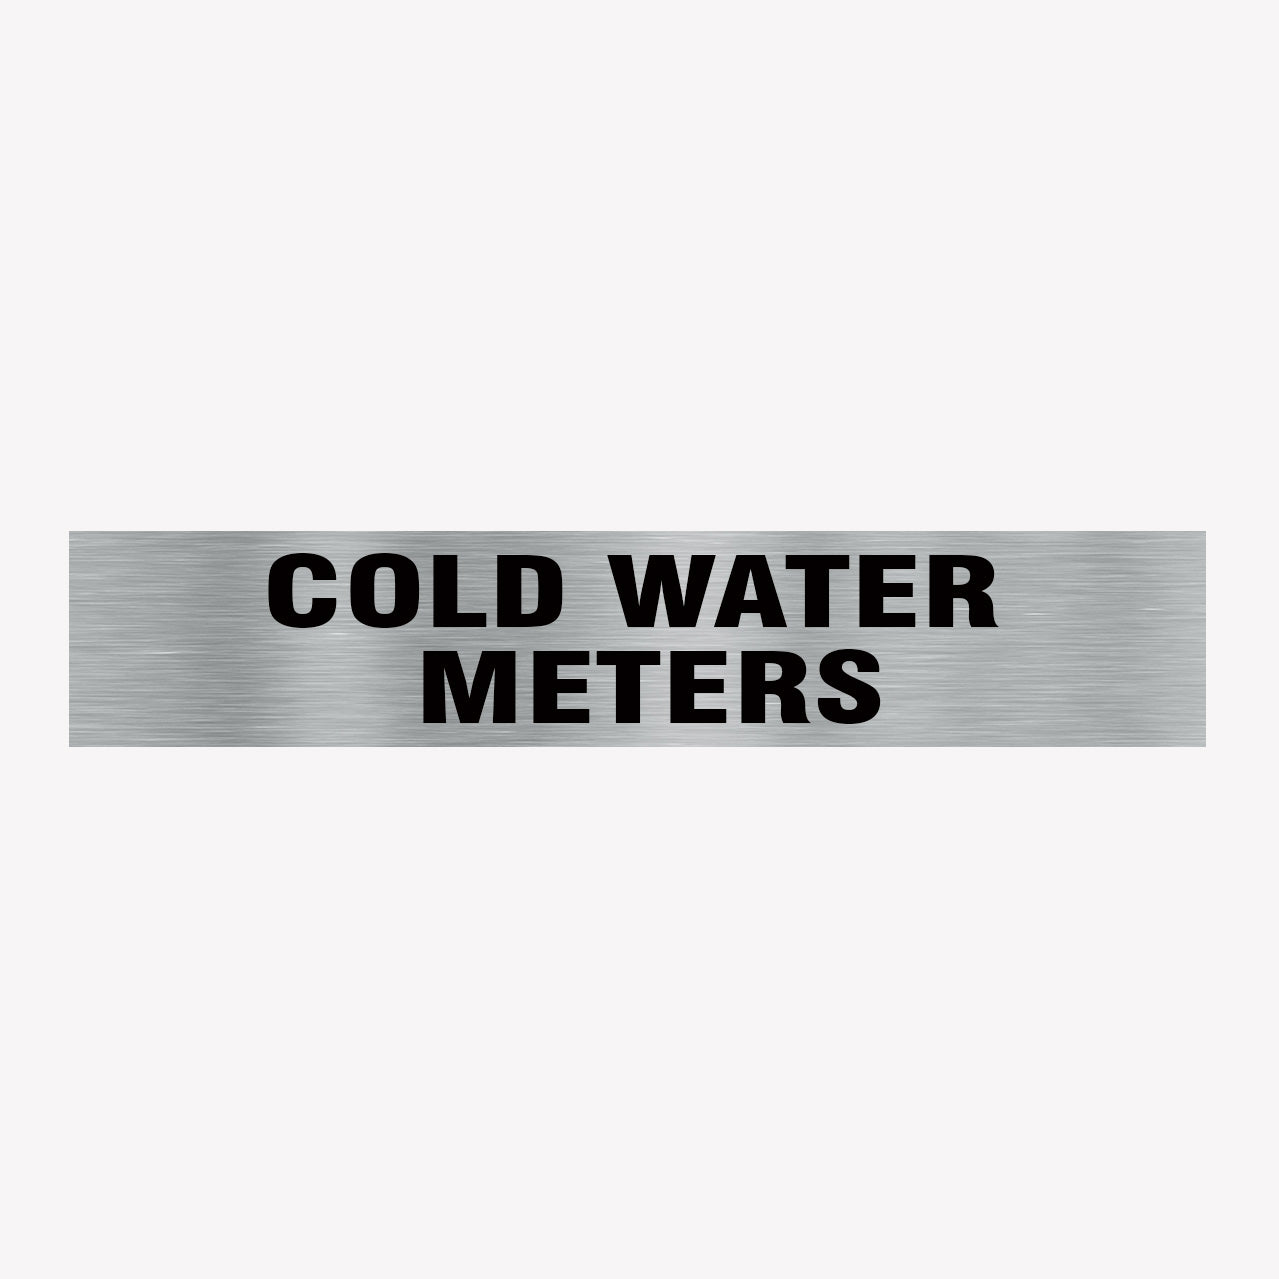 COLD WATER METERS SIGN